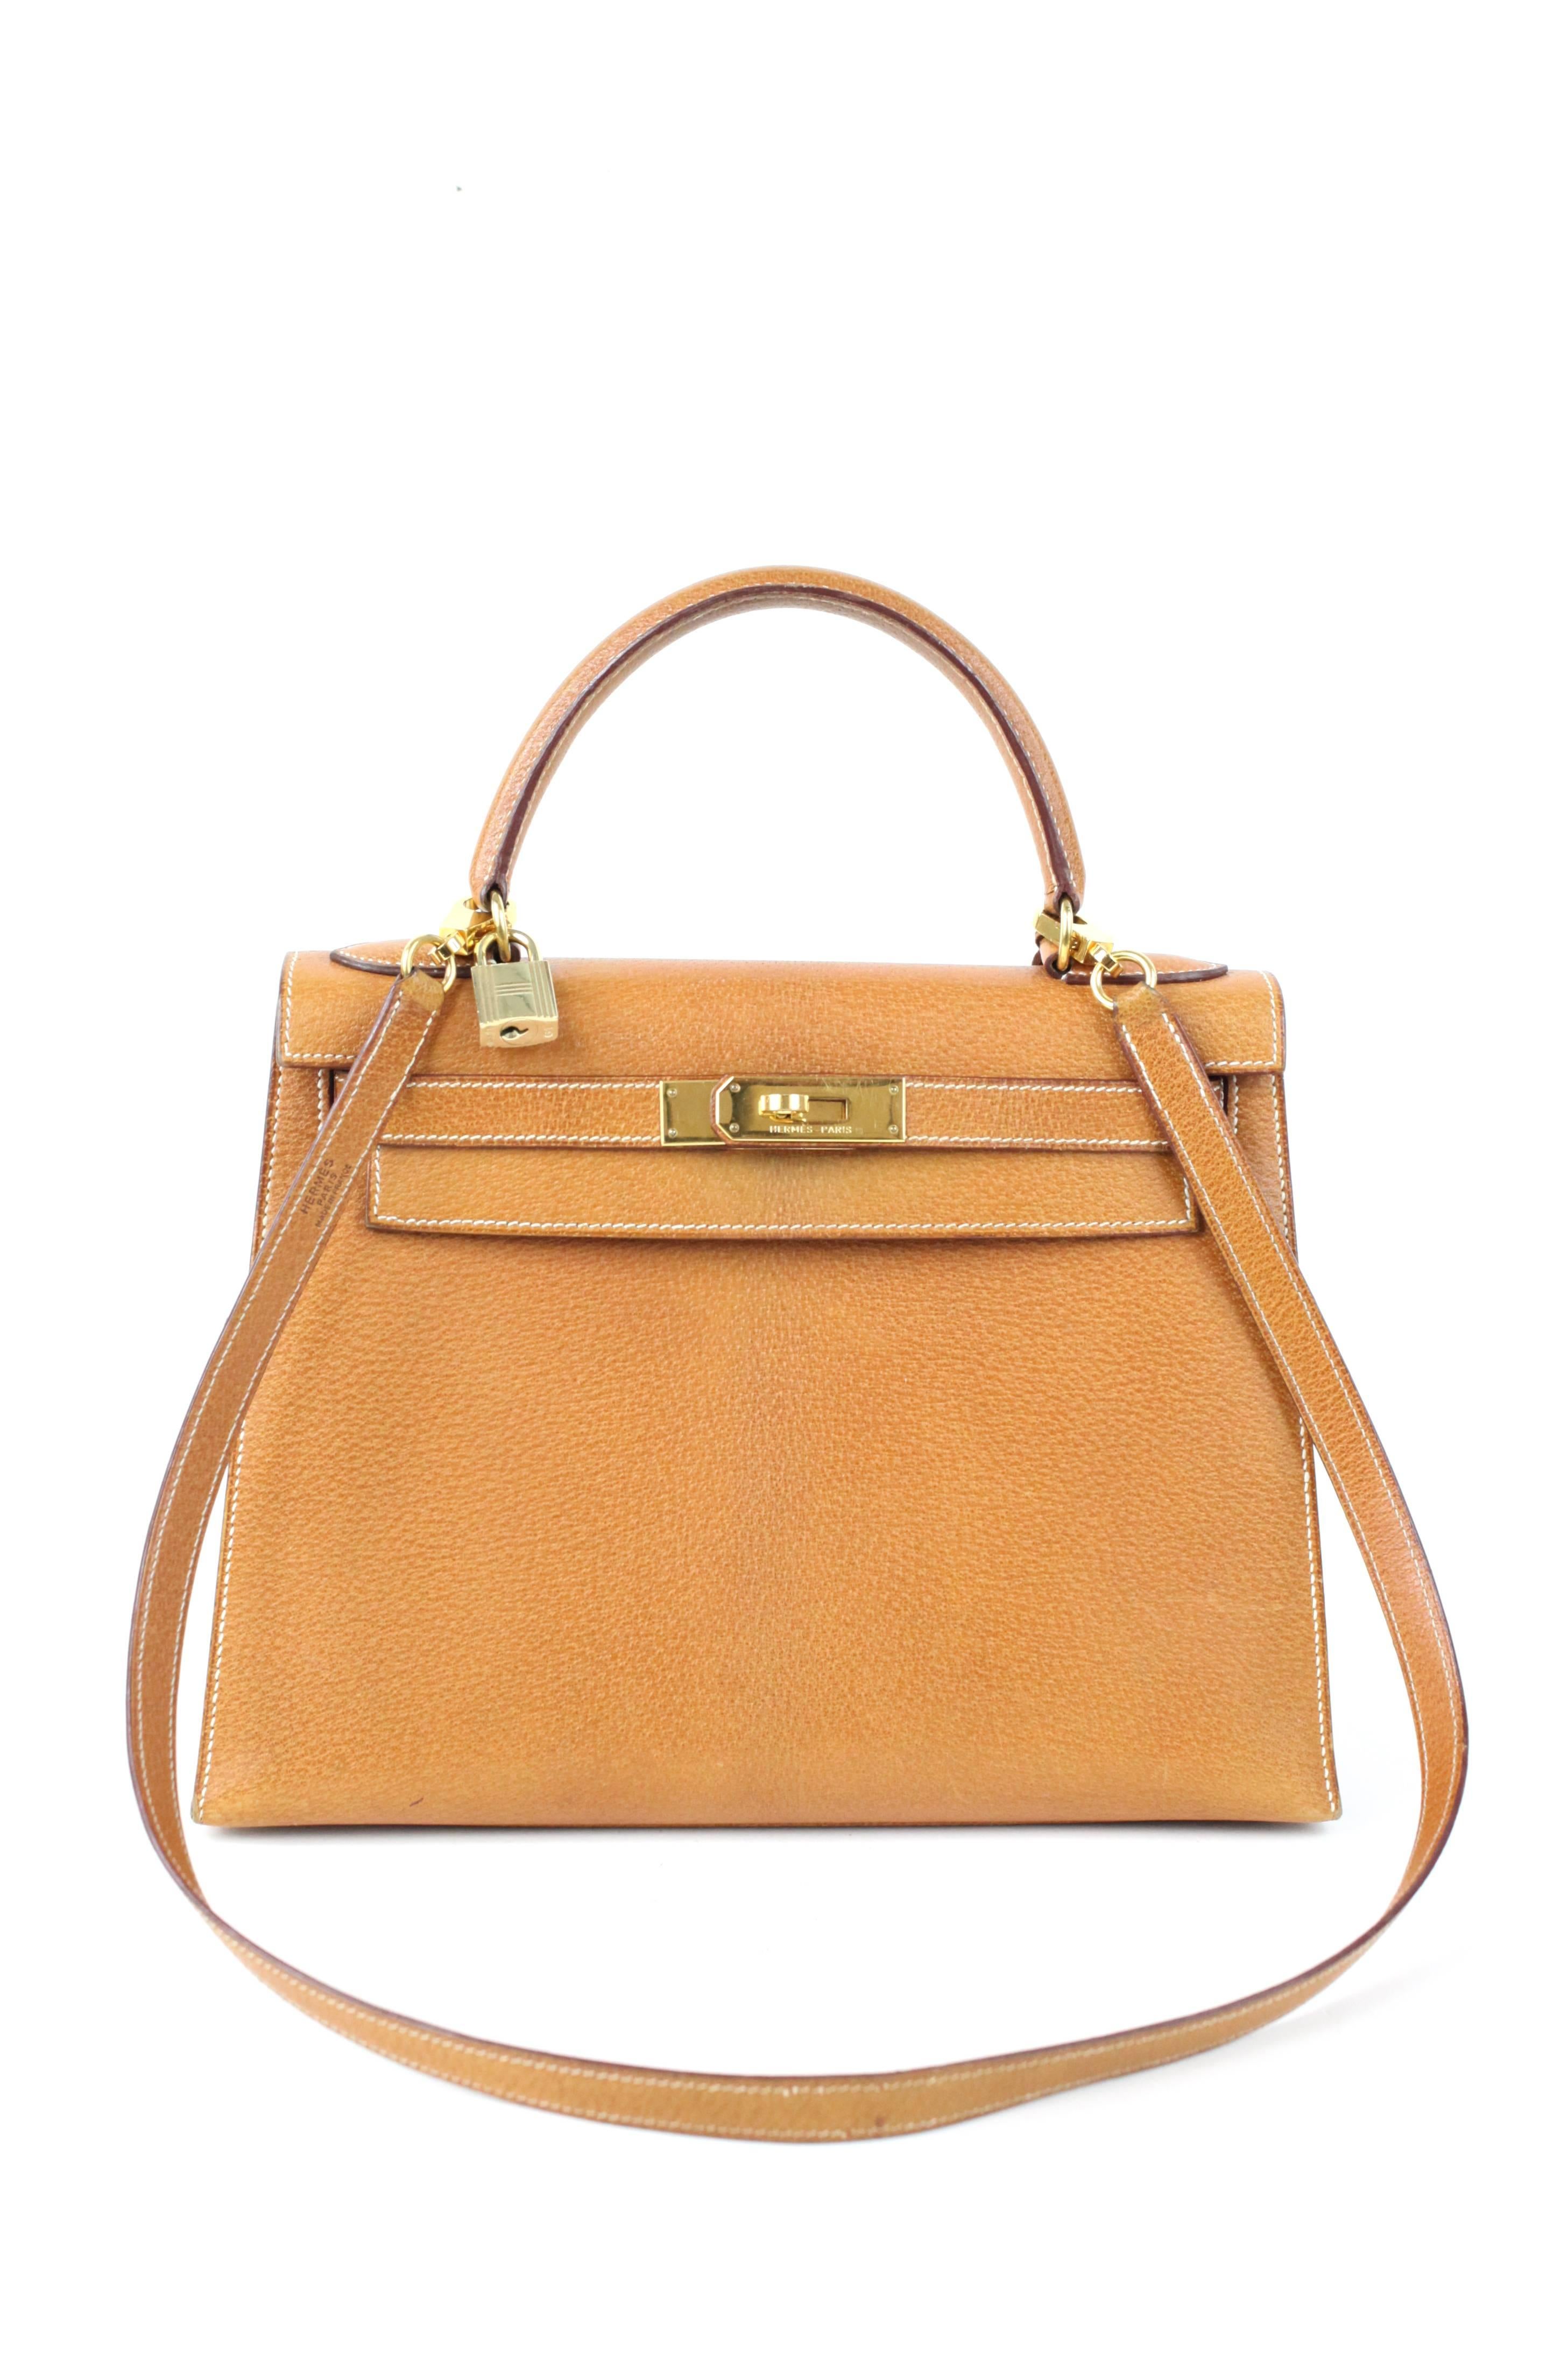 Offered is an incredibly well kept Hermes Kelly Retourne 28 cm in Pigskin leather. This style can be worn as a shoulder bag or a top handle. As this is a vintage bag there are several signs of wear across the bag.  There are scratches on the